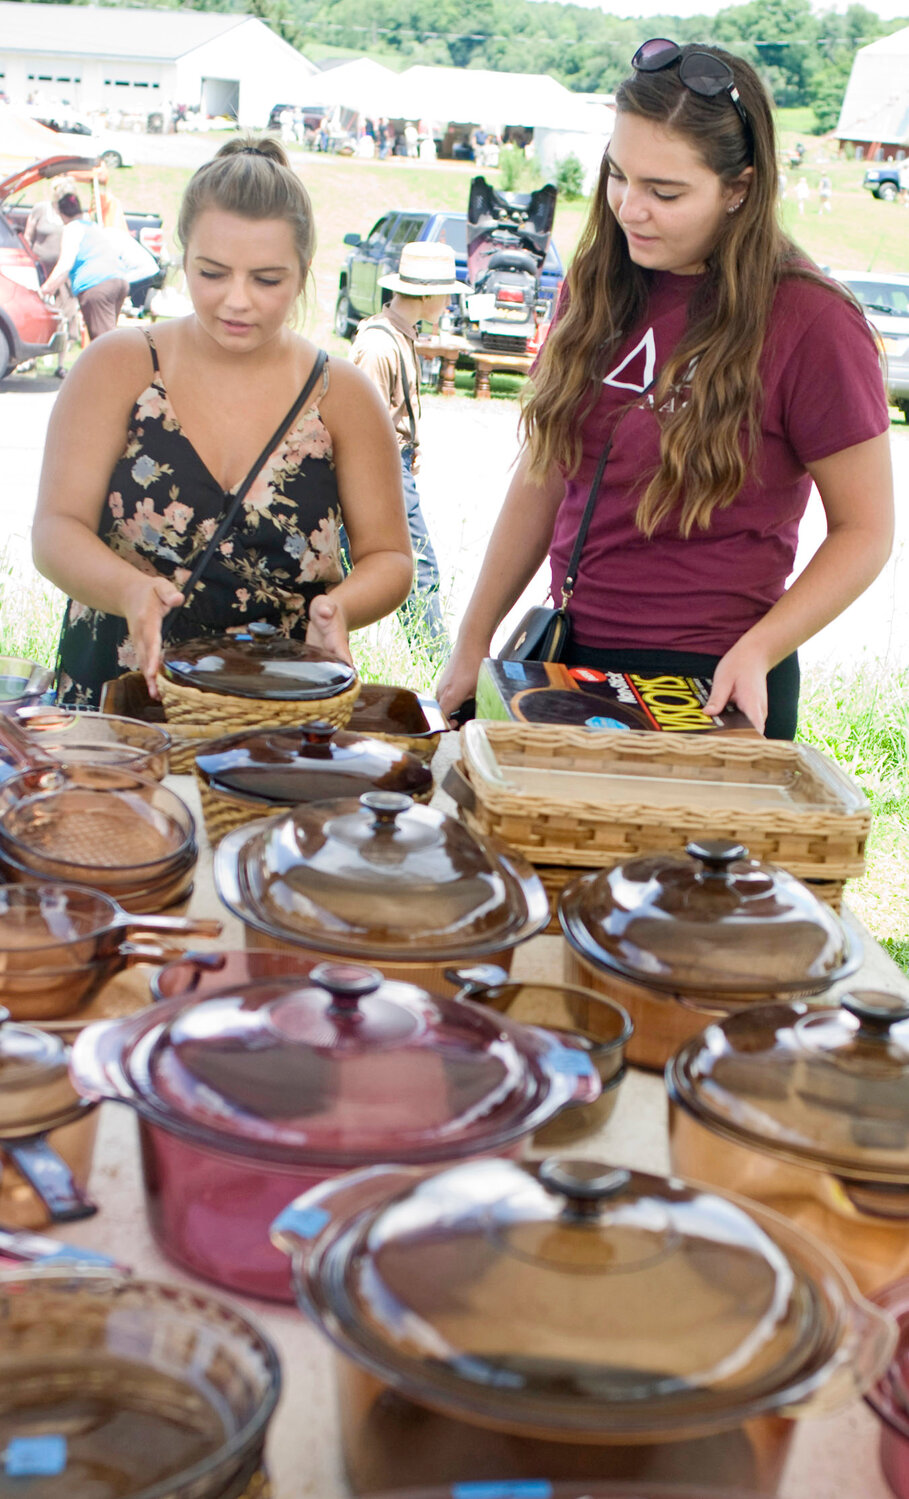 Destany Beebe, left, and Danielle Lynch, right, shop for crockery in 2018 in the Summerhill section of the Route 90 Garage Sale. The event returns this weekend.